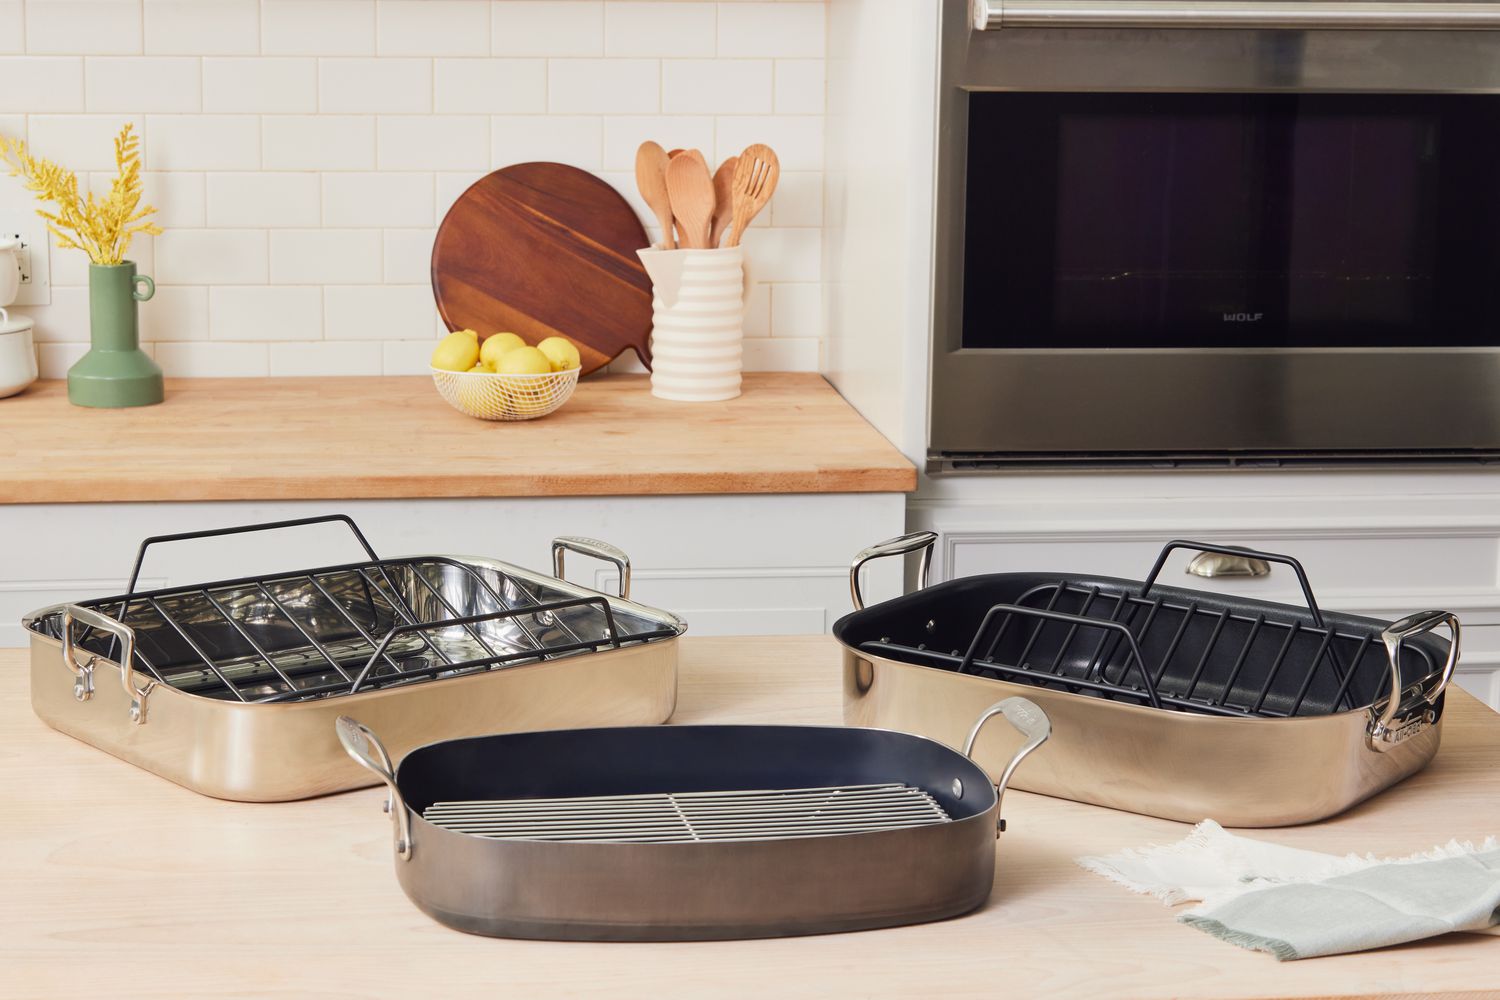 Best roasting pans displayed on a kitchen countertop